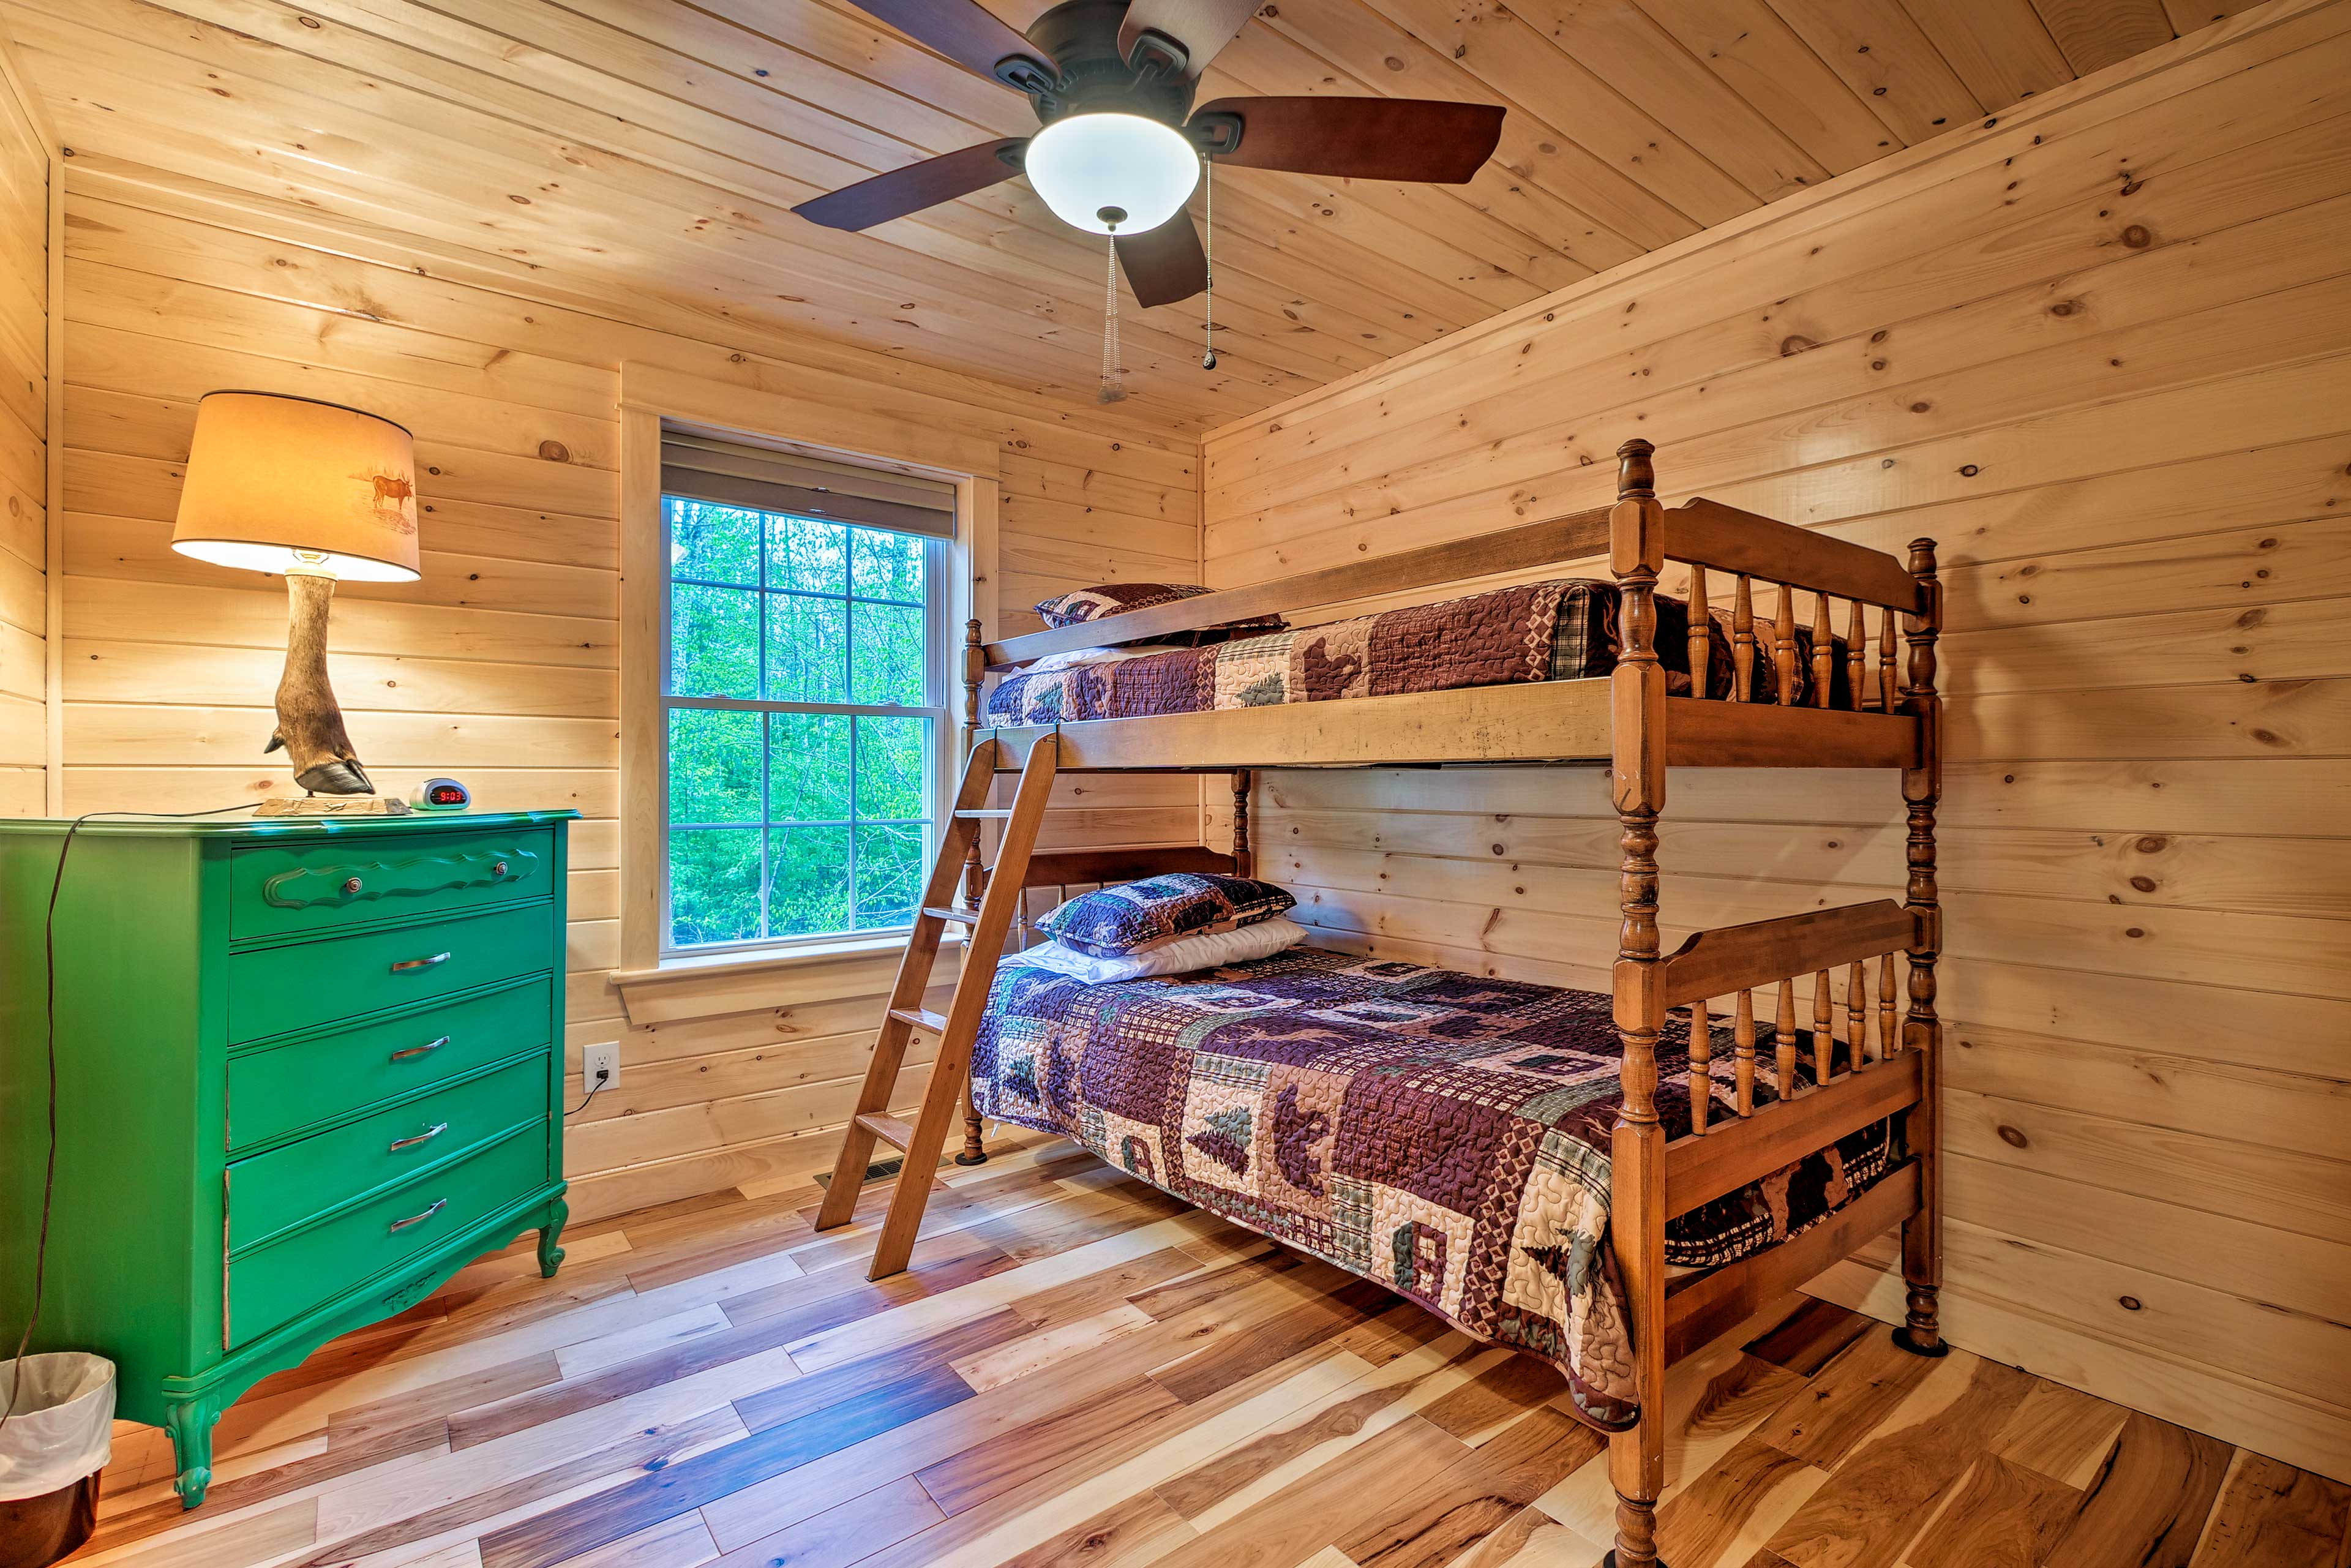 This room boasts a bunk bed.